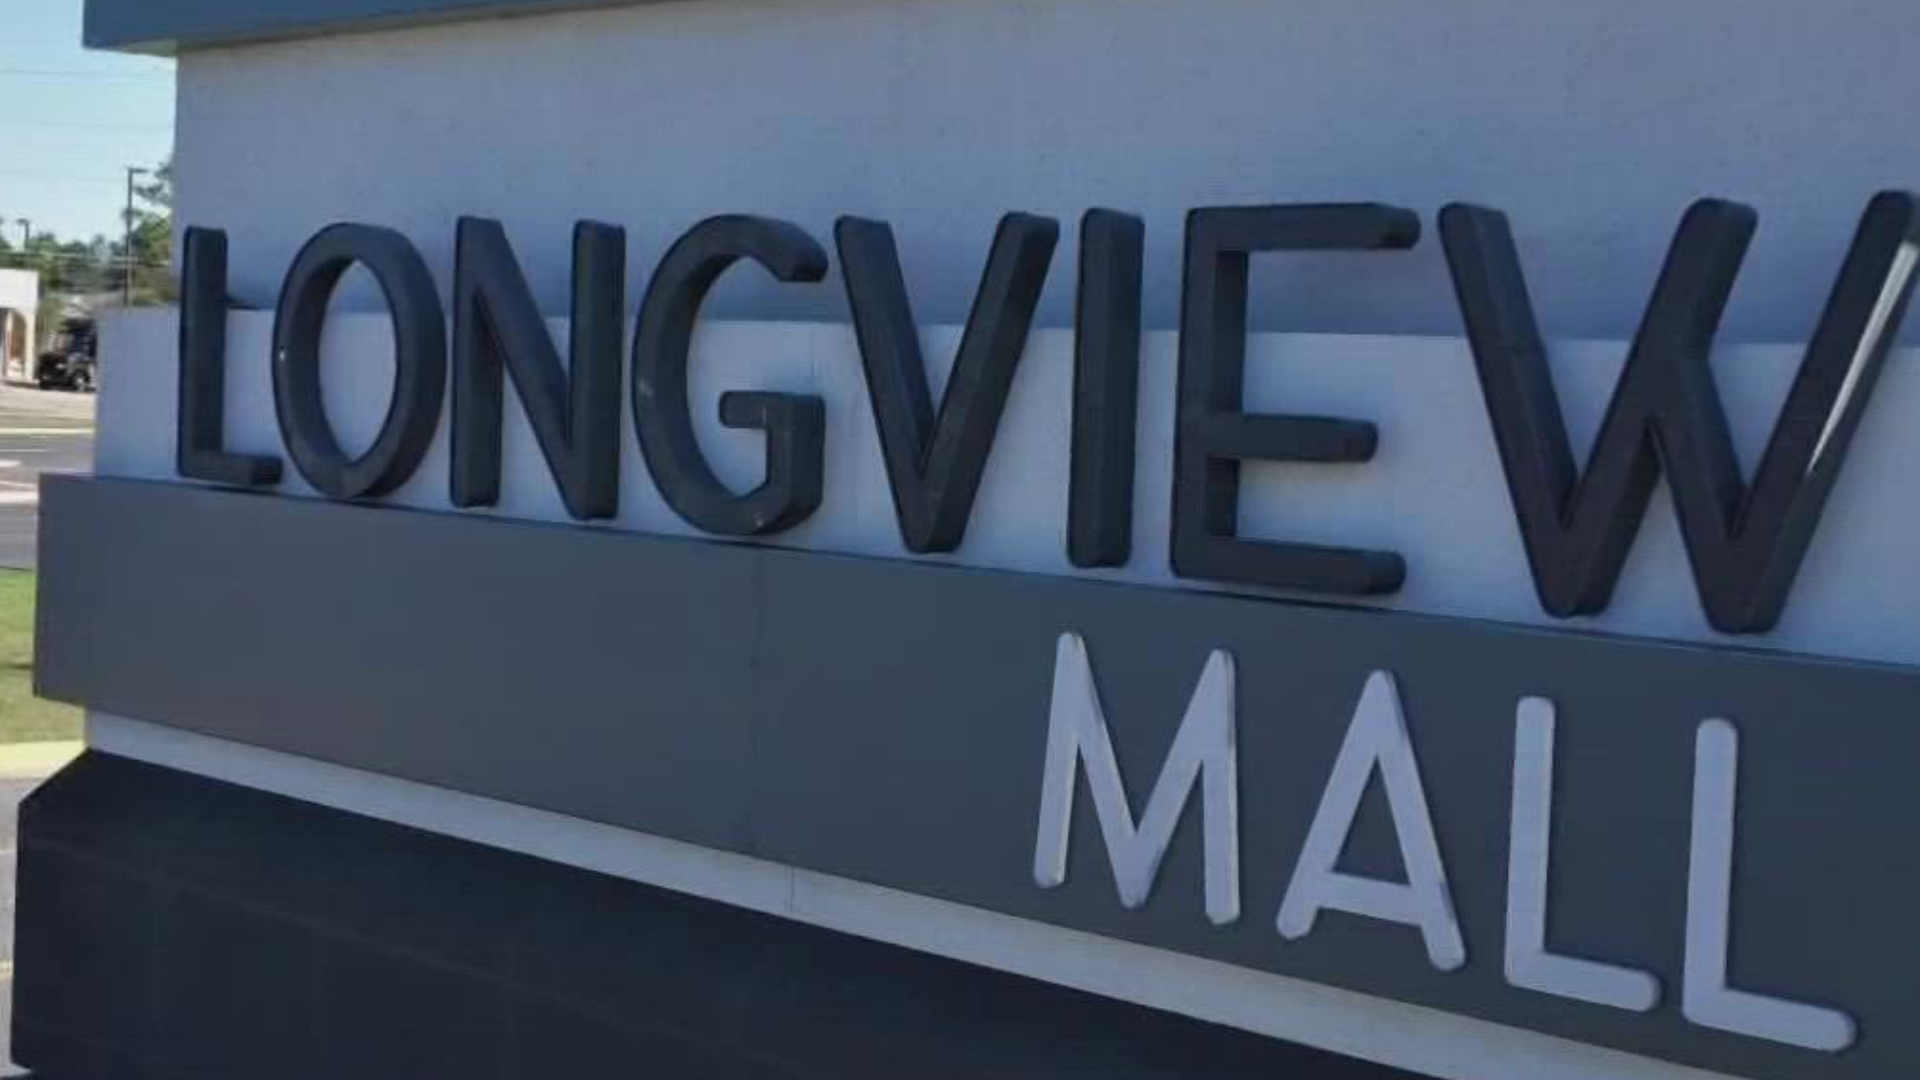 The Longview Mall general manager said she doesn't believe malls are dead, but rather evolving like the Longview Mall.